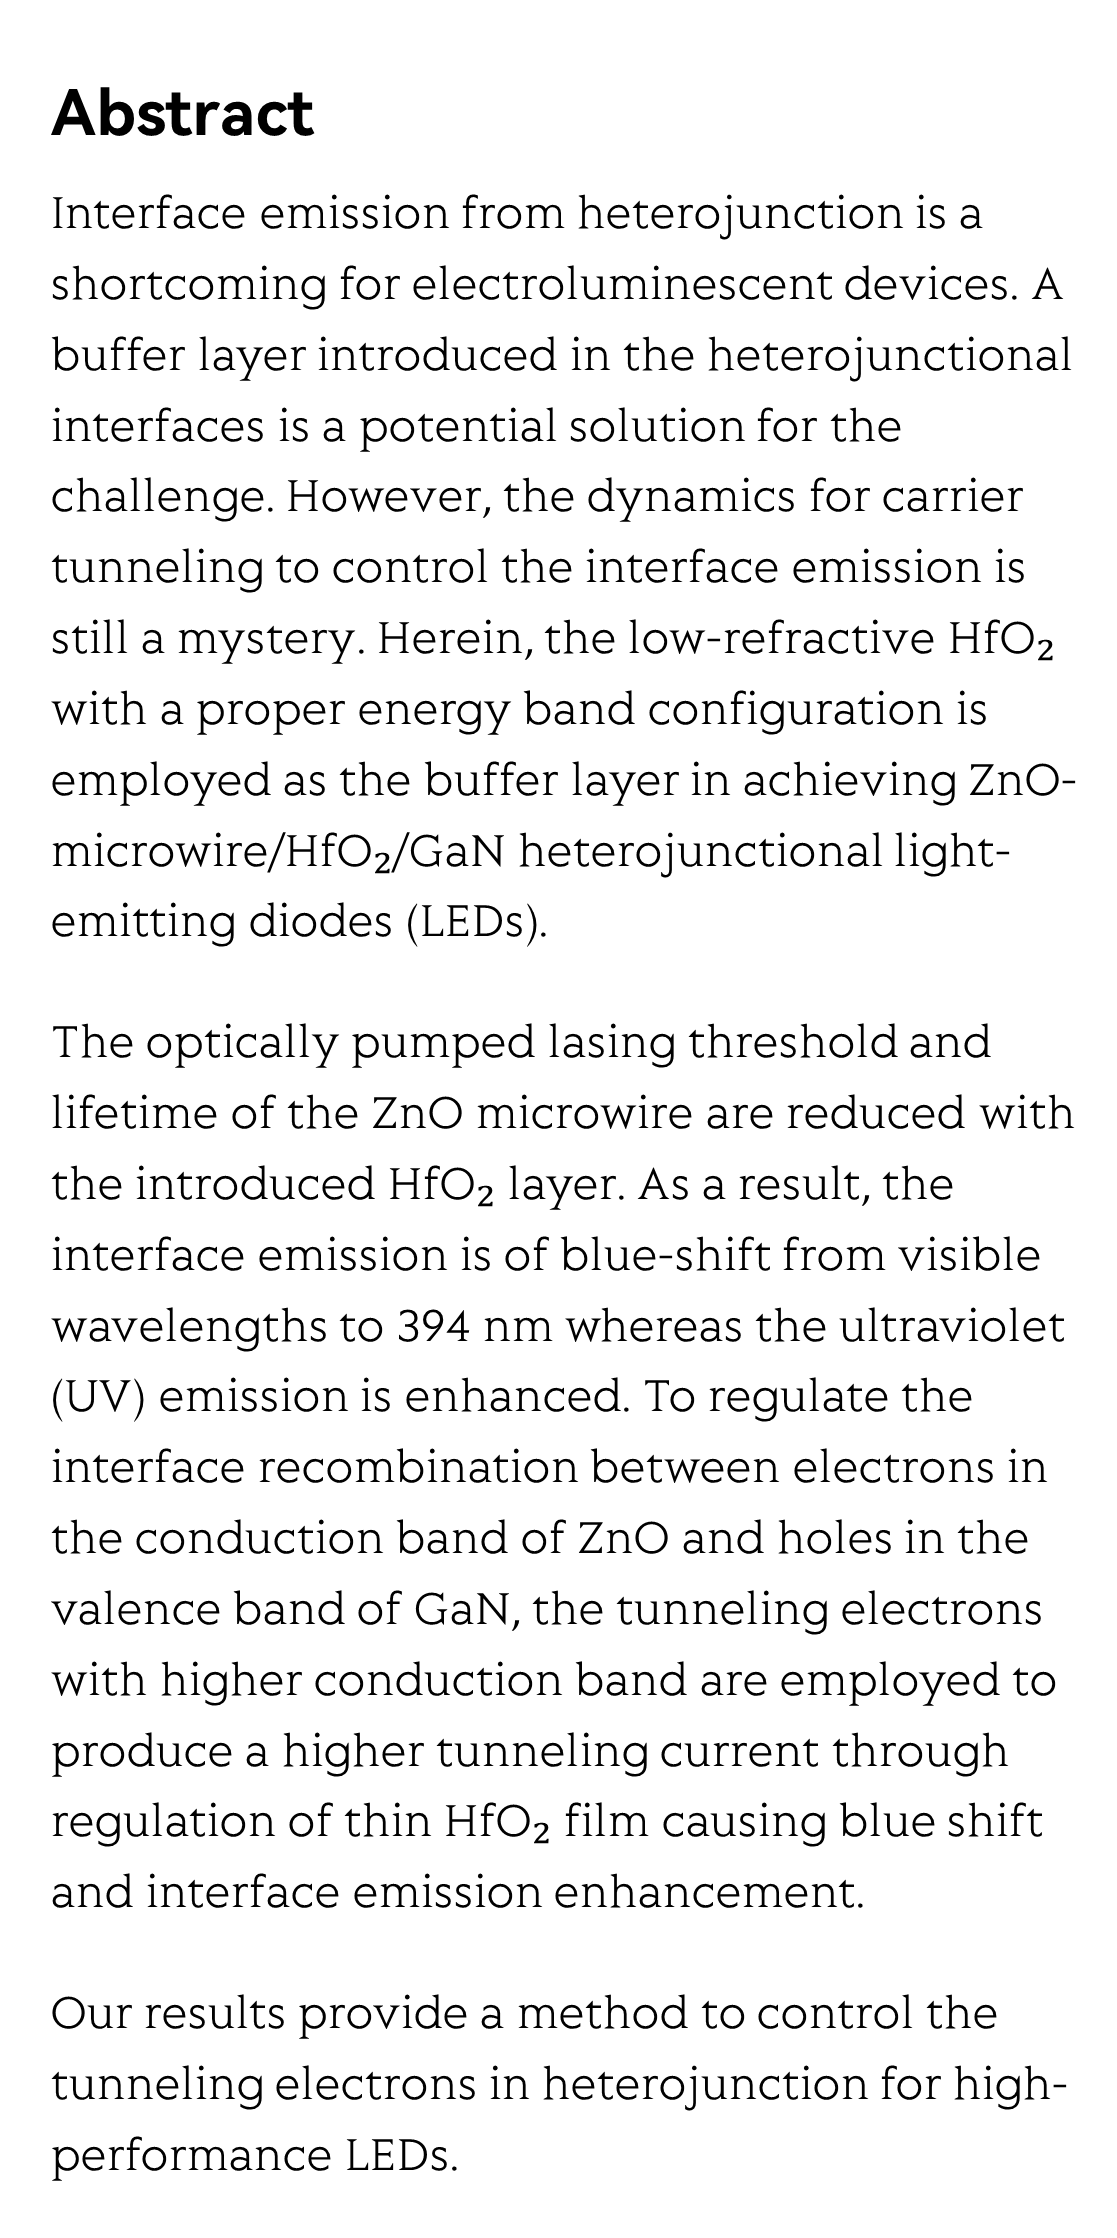 Nano-buffer controlled electron tunneling to regulate heterojunctional interface emission_2